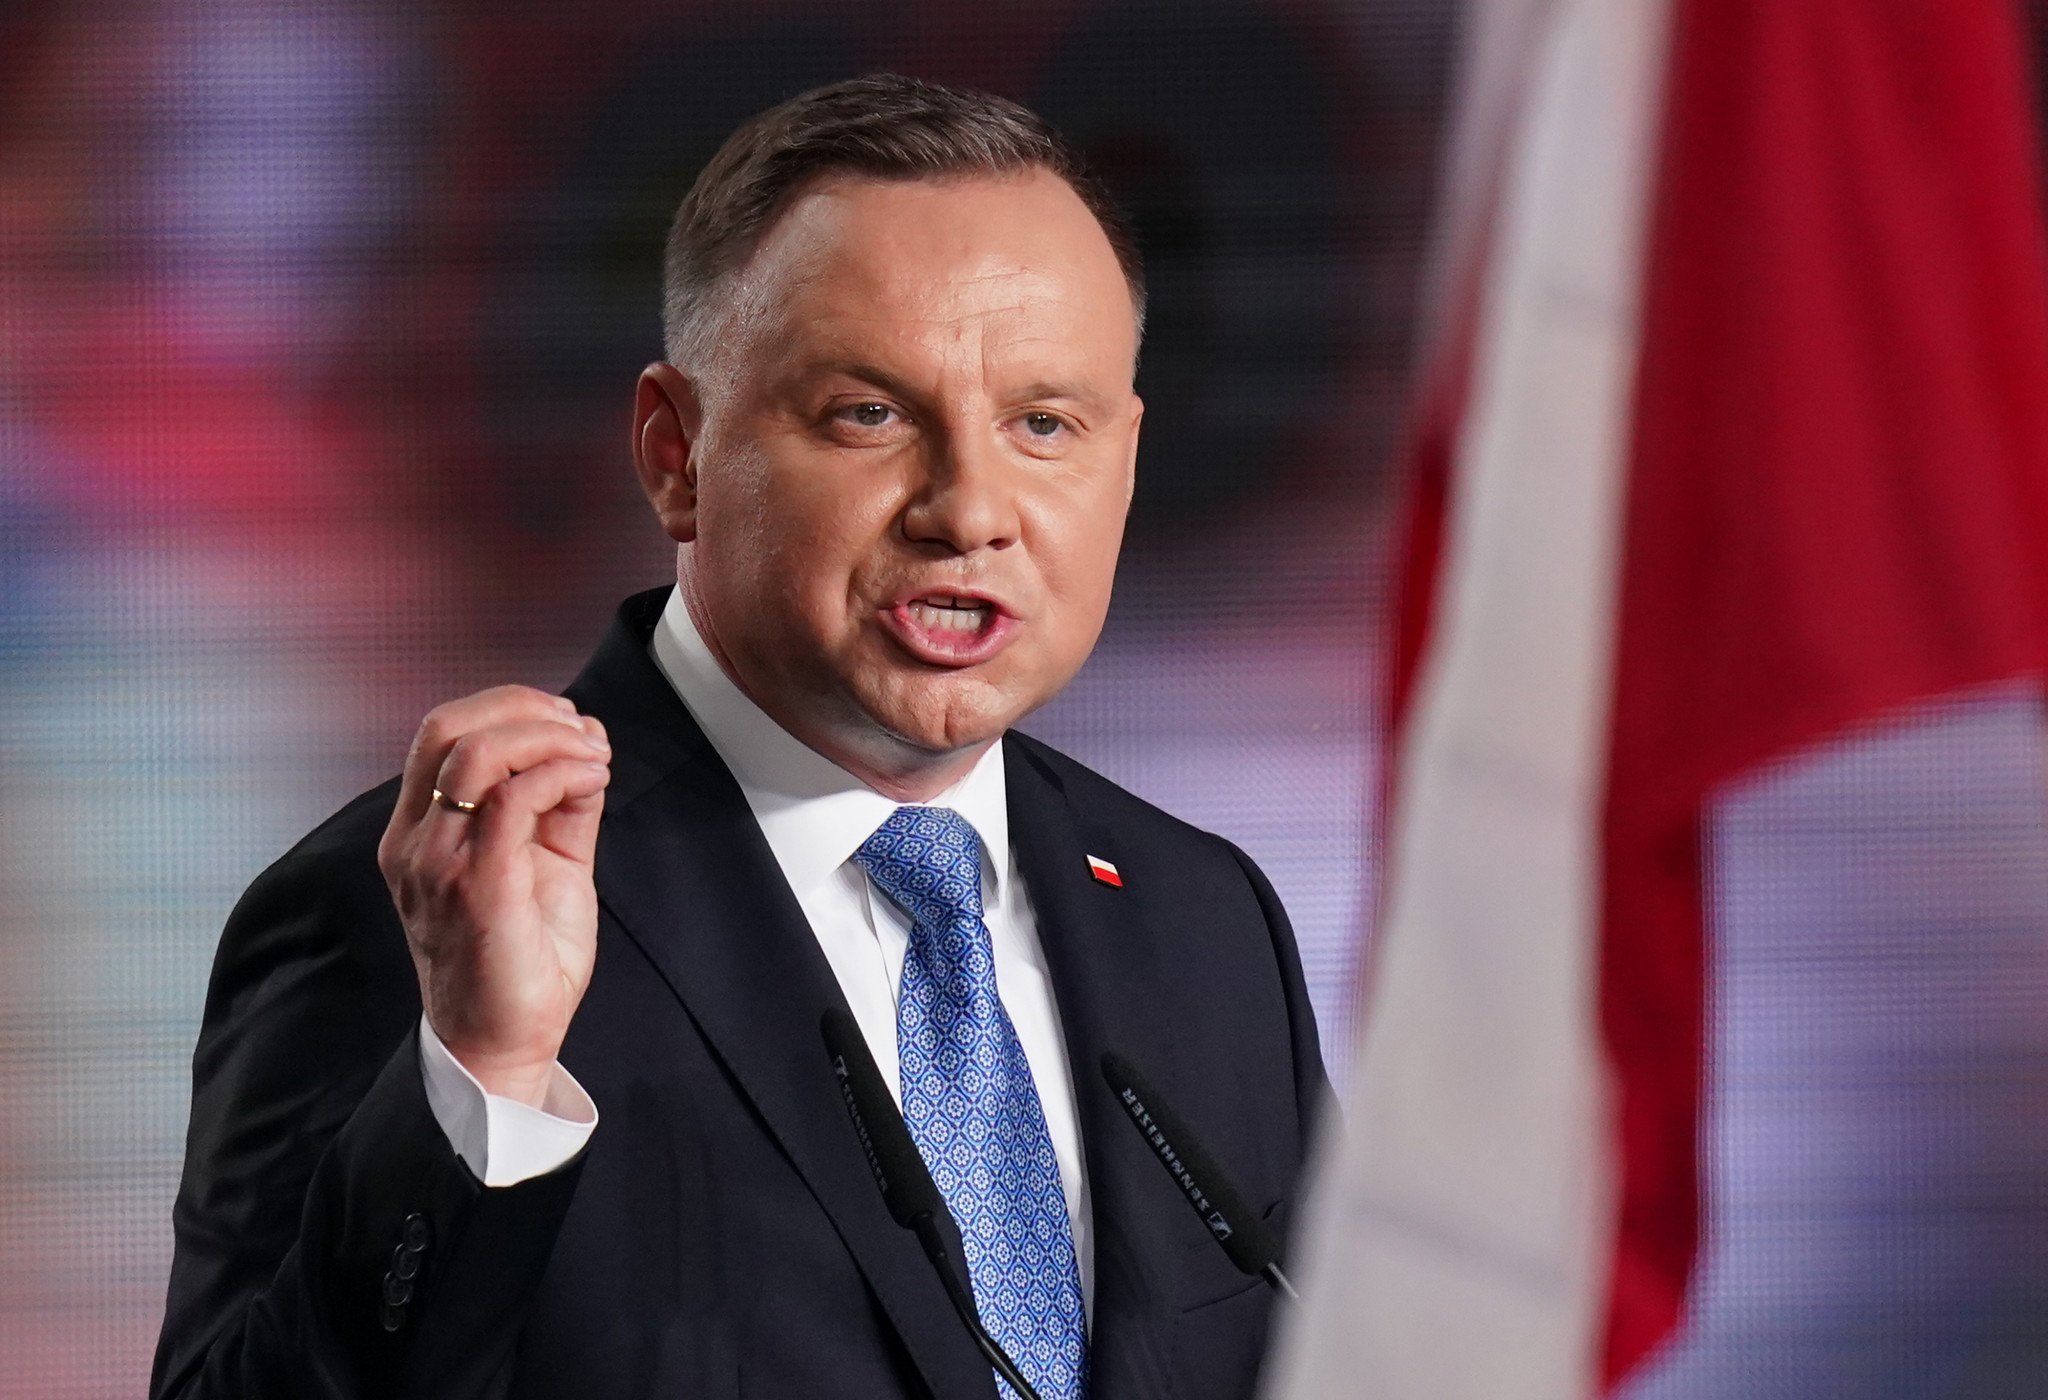 Funding has been an issue in the build-up to the European Games, but progress appears to have been made with the formation of an Organising Committee and an act of support signed by Polish President Andrzej Duda ©Getty Images